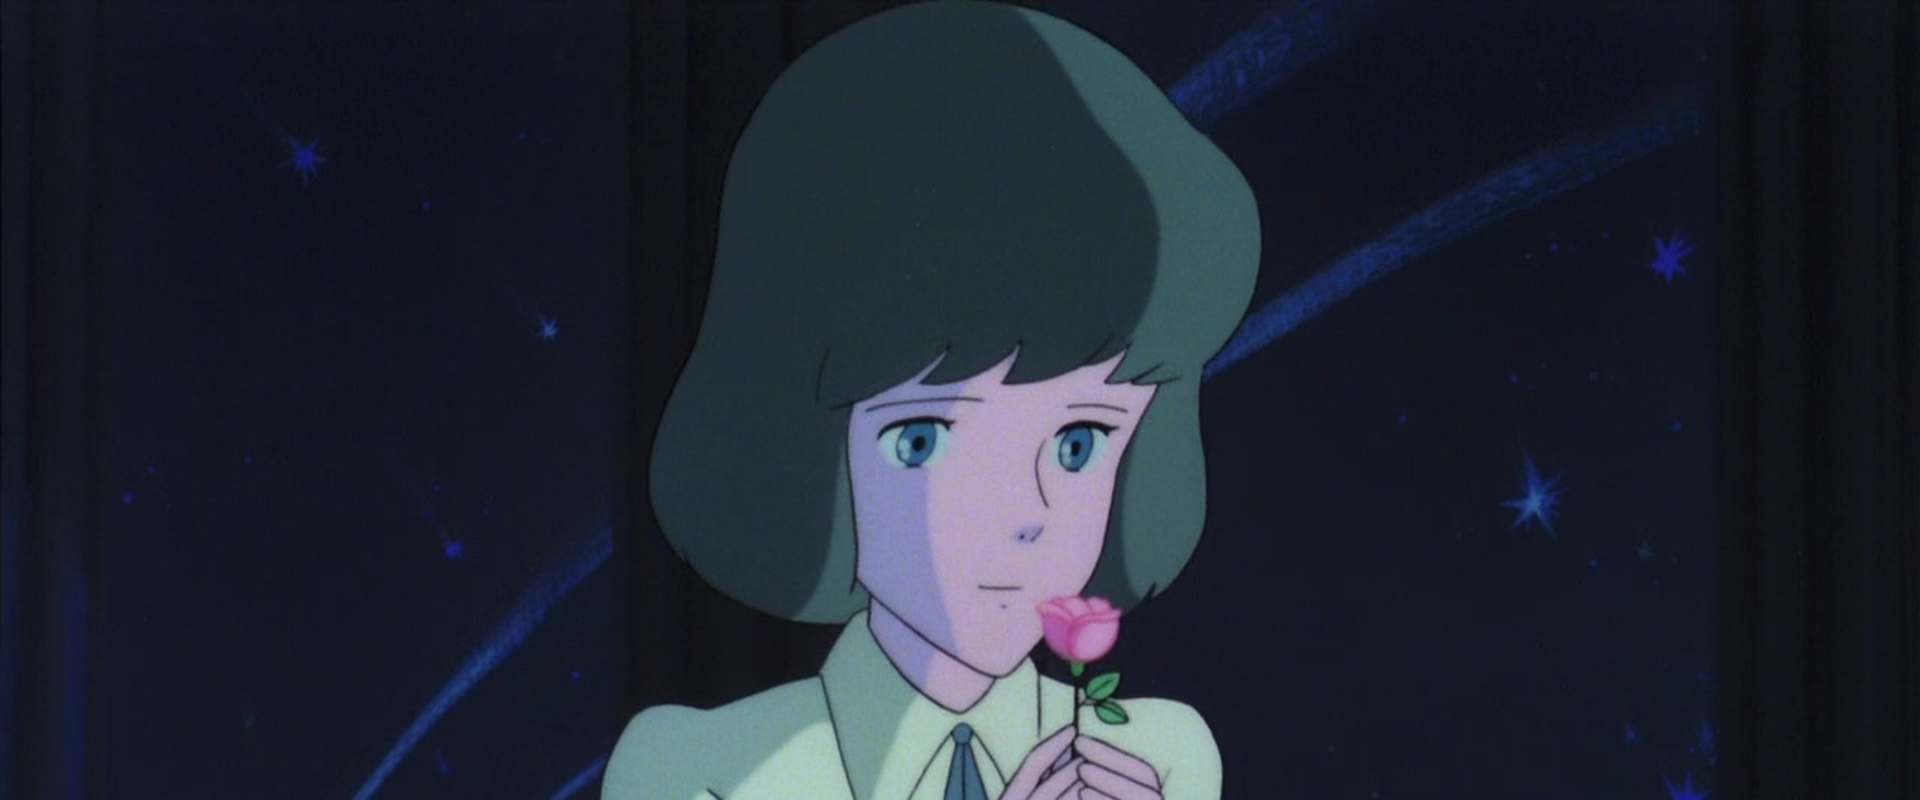 Lupin the Third: The Castle of Cagliostro background 2